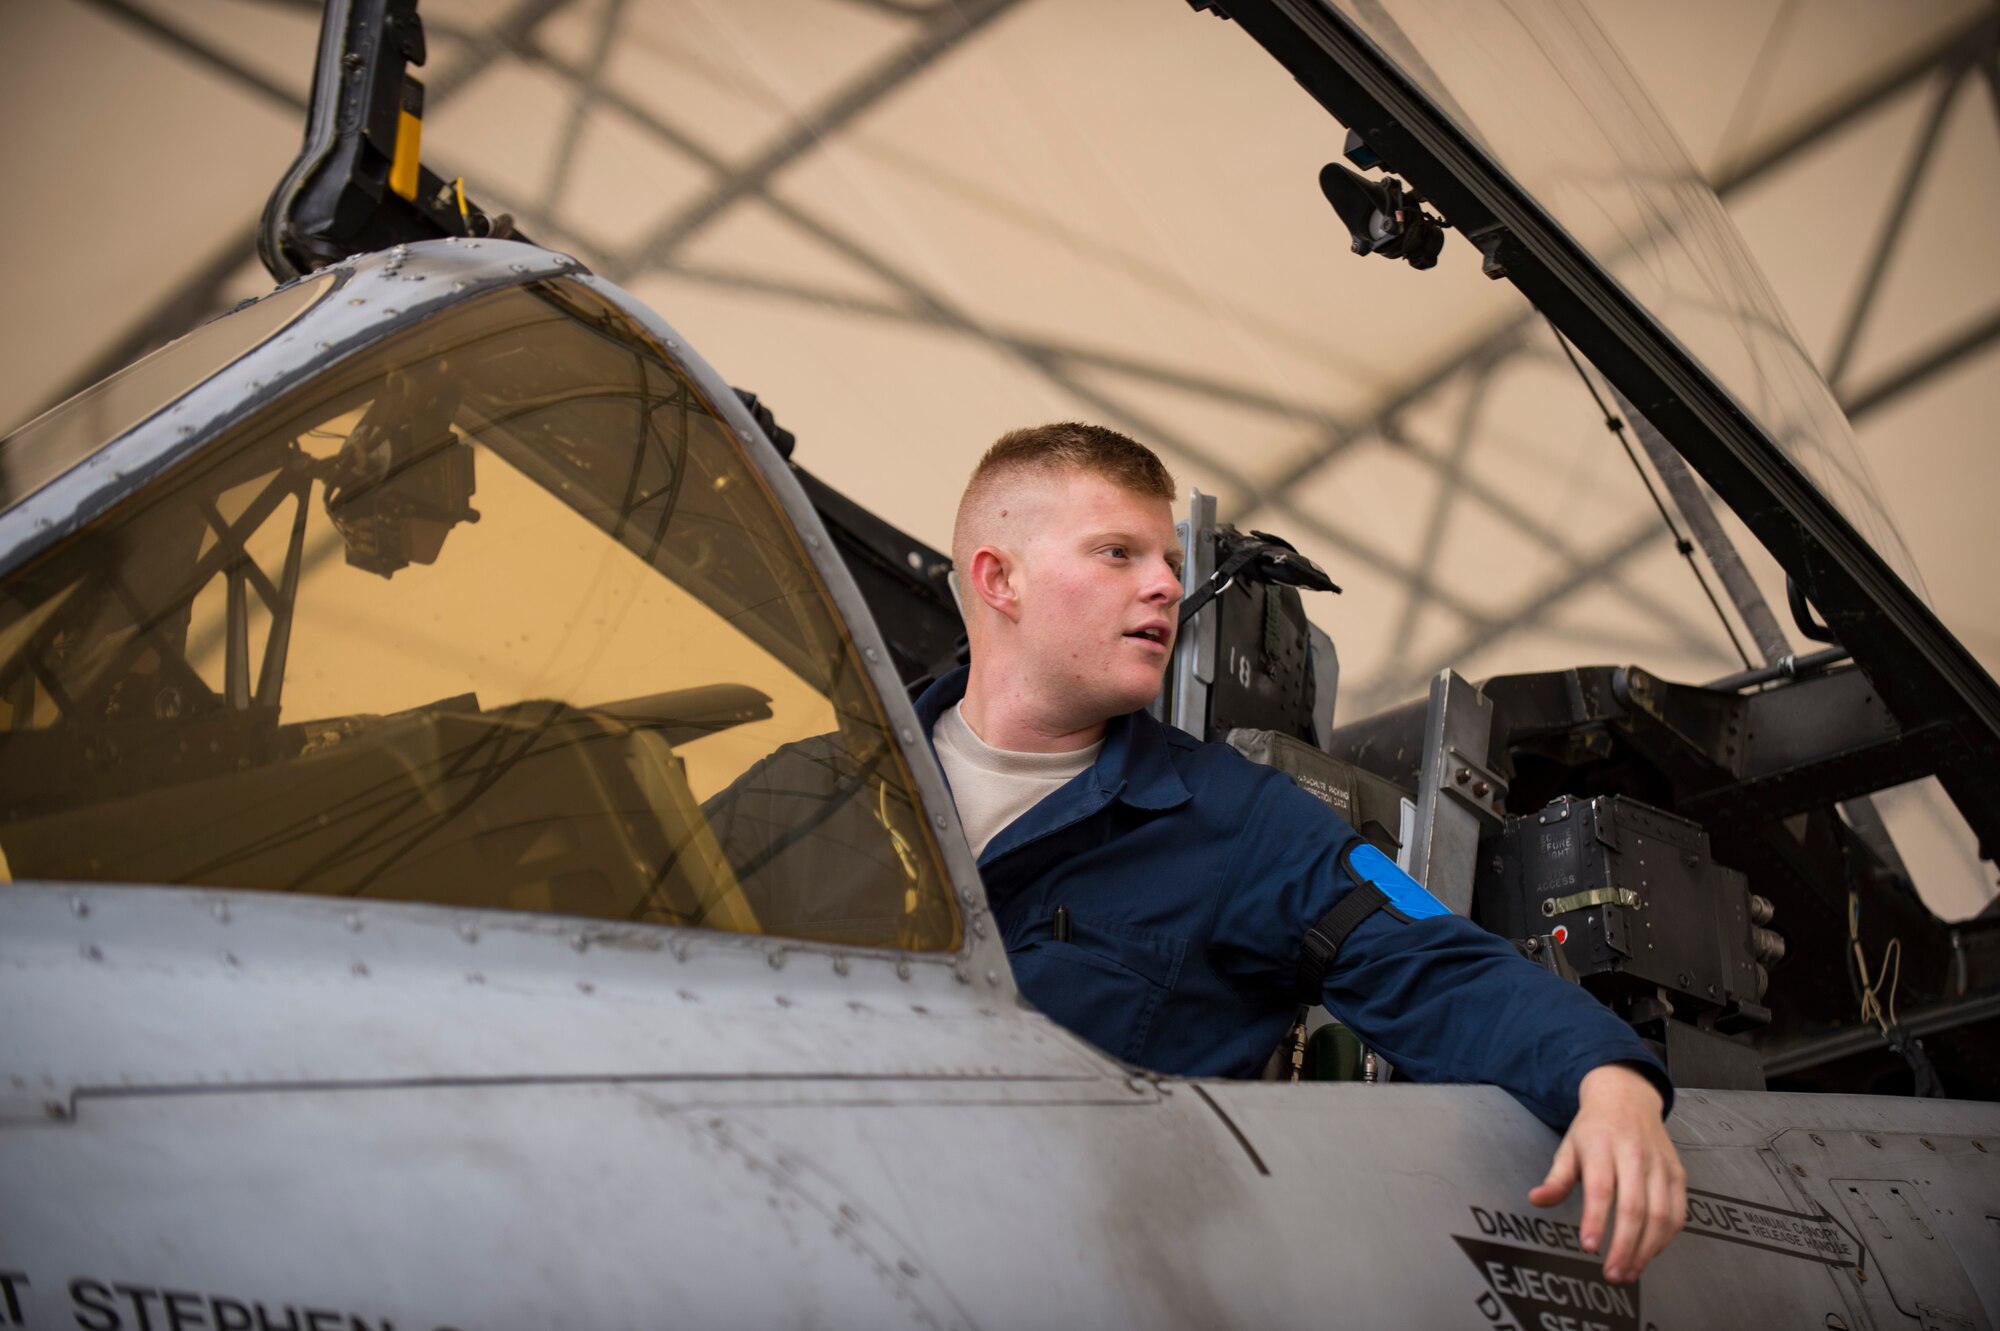 Airman 1st Class Tyler Boyd, 74th Aircraft Maintenance Unit crew chief, yells down to fellow maintainers while performing a thru flight inspection on an A-10C Thunderbolt II, Dec. 7, 2017, at Moody Air Force Base, Ga. Moody recently participated in a week-long, Phase 1, Phase 2 exercise designed to demonstrate the 23d Wing’s ability to meet combatant commander objectives. The exercise tested pilots’ and maintainers’ ability to launch around-the-clock sorties at an accelerated rate during surge operations. (U.S. Air Force photo by Andrea Jenkins)